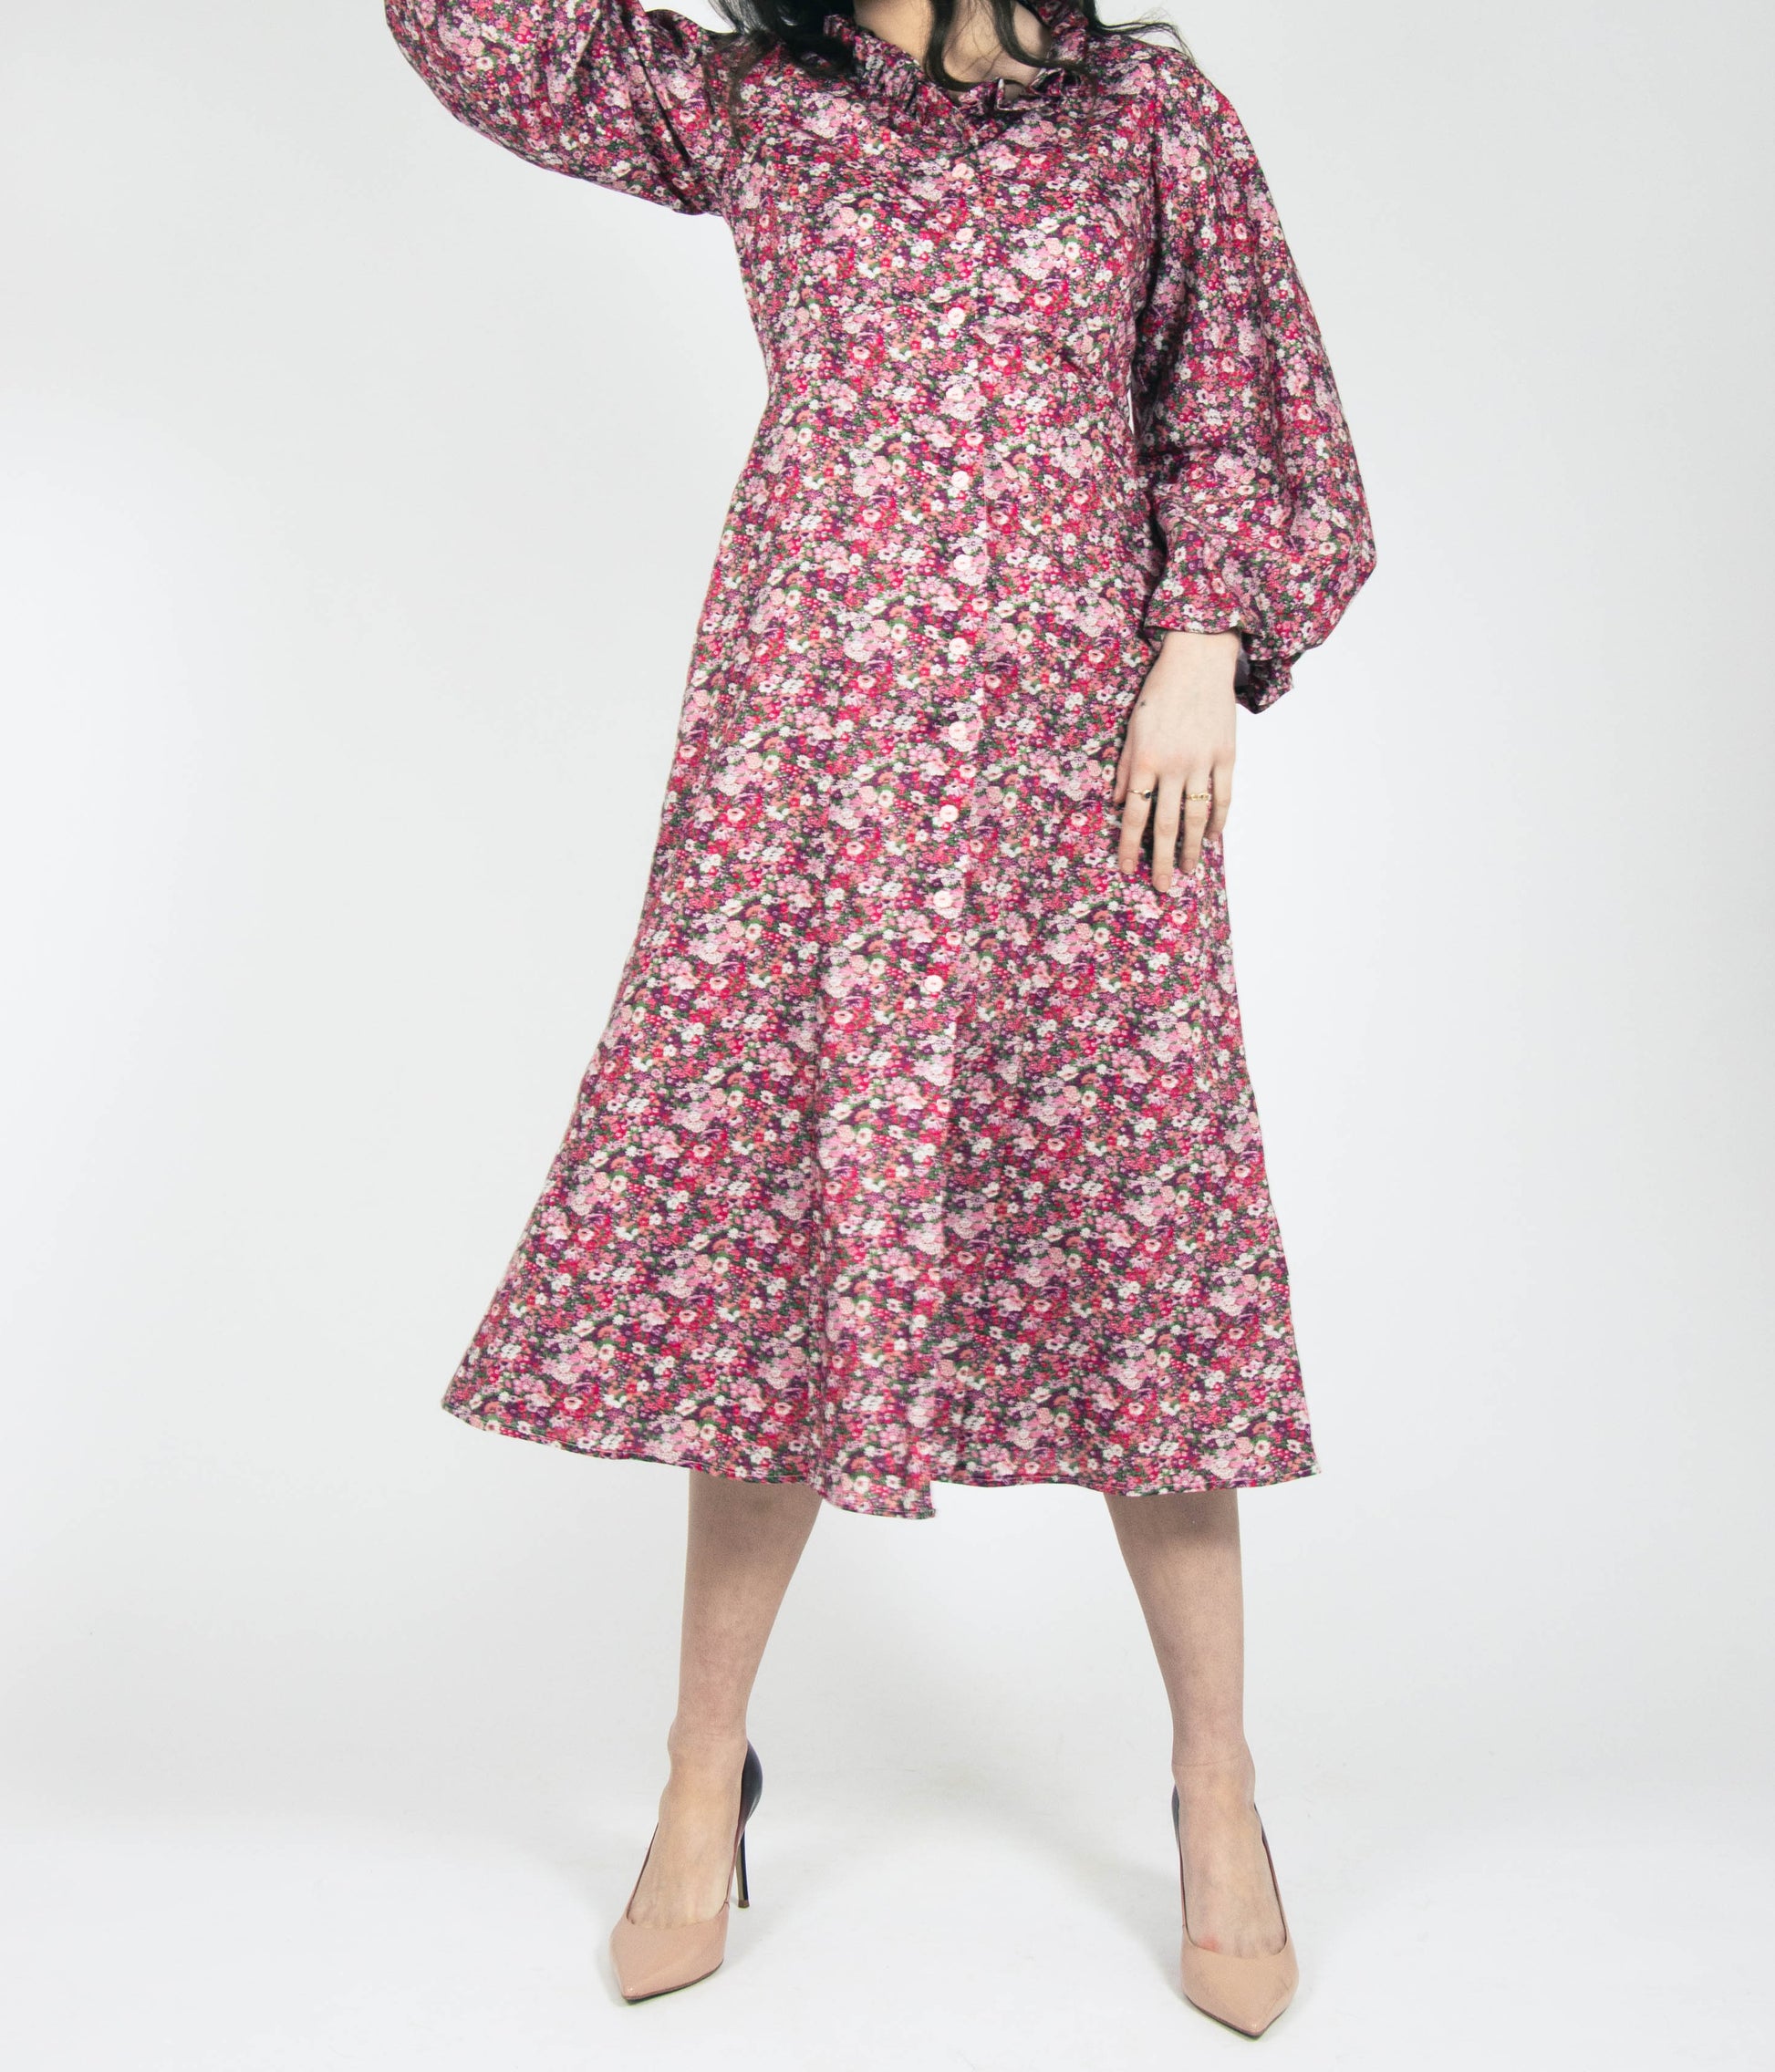 wedding fashion button up midi dress with puff sleeve made in ireland cotton fabric small floral print